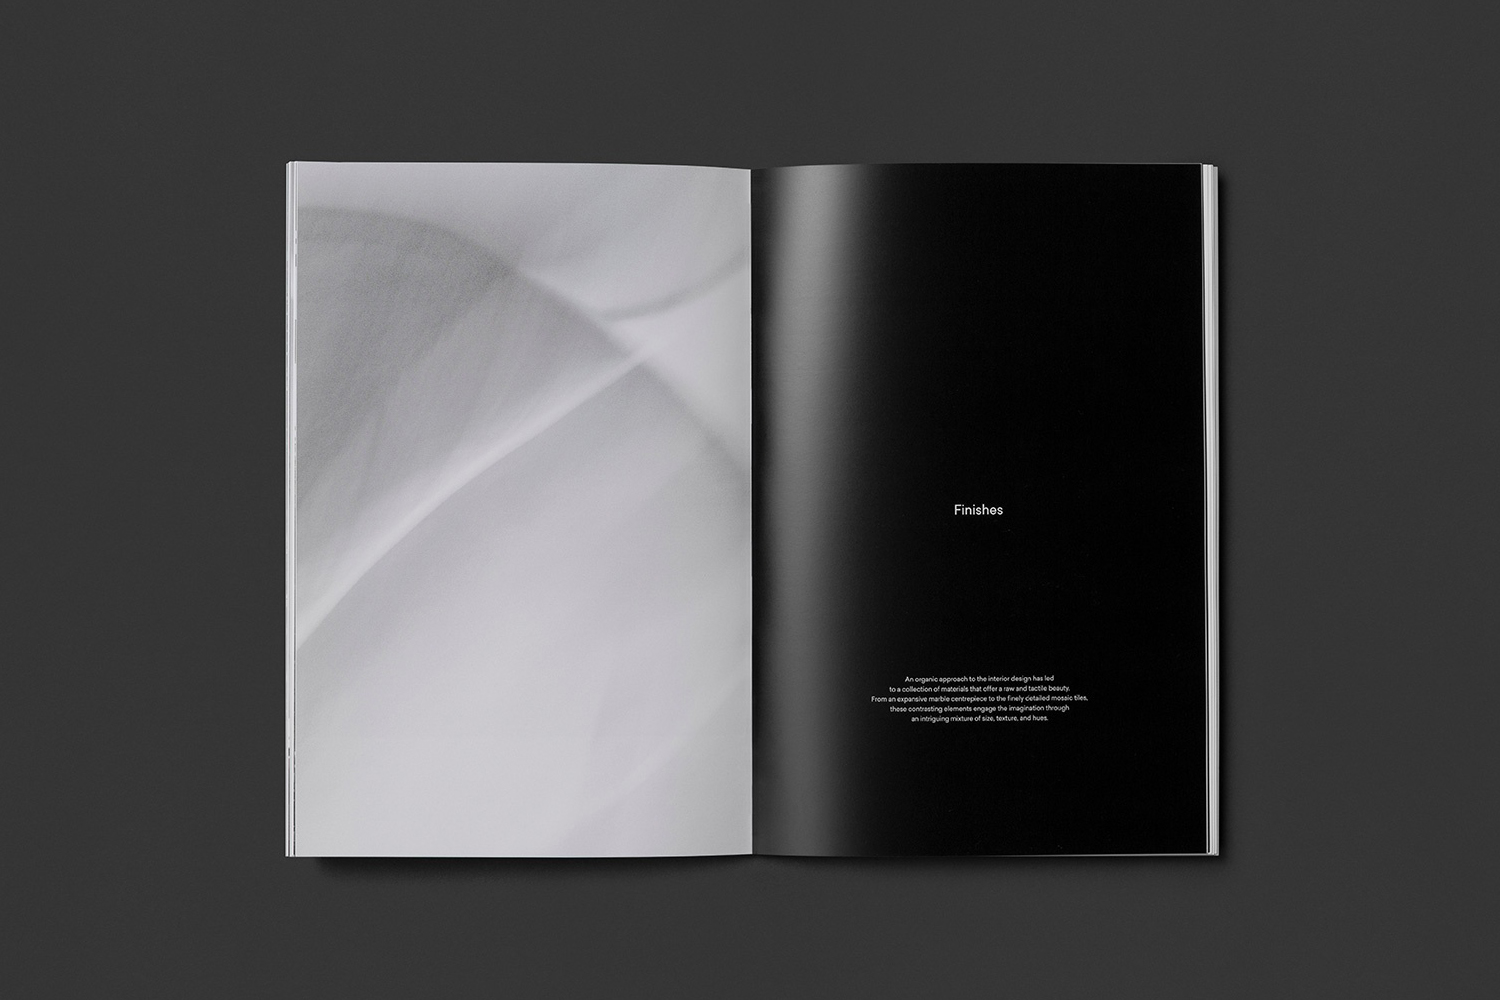 Brochure by Studio Brave for East Melbourne residential apartments George + Powlett